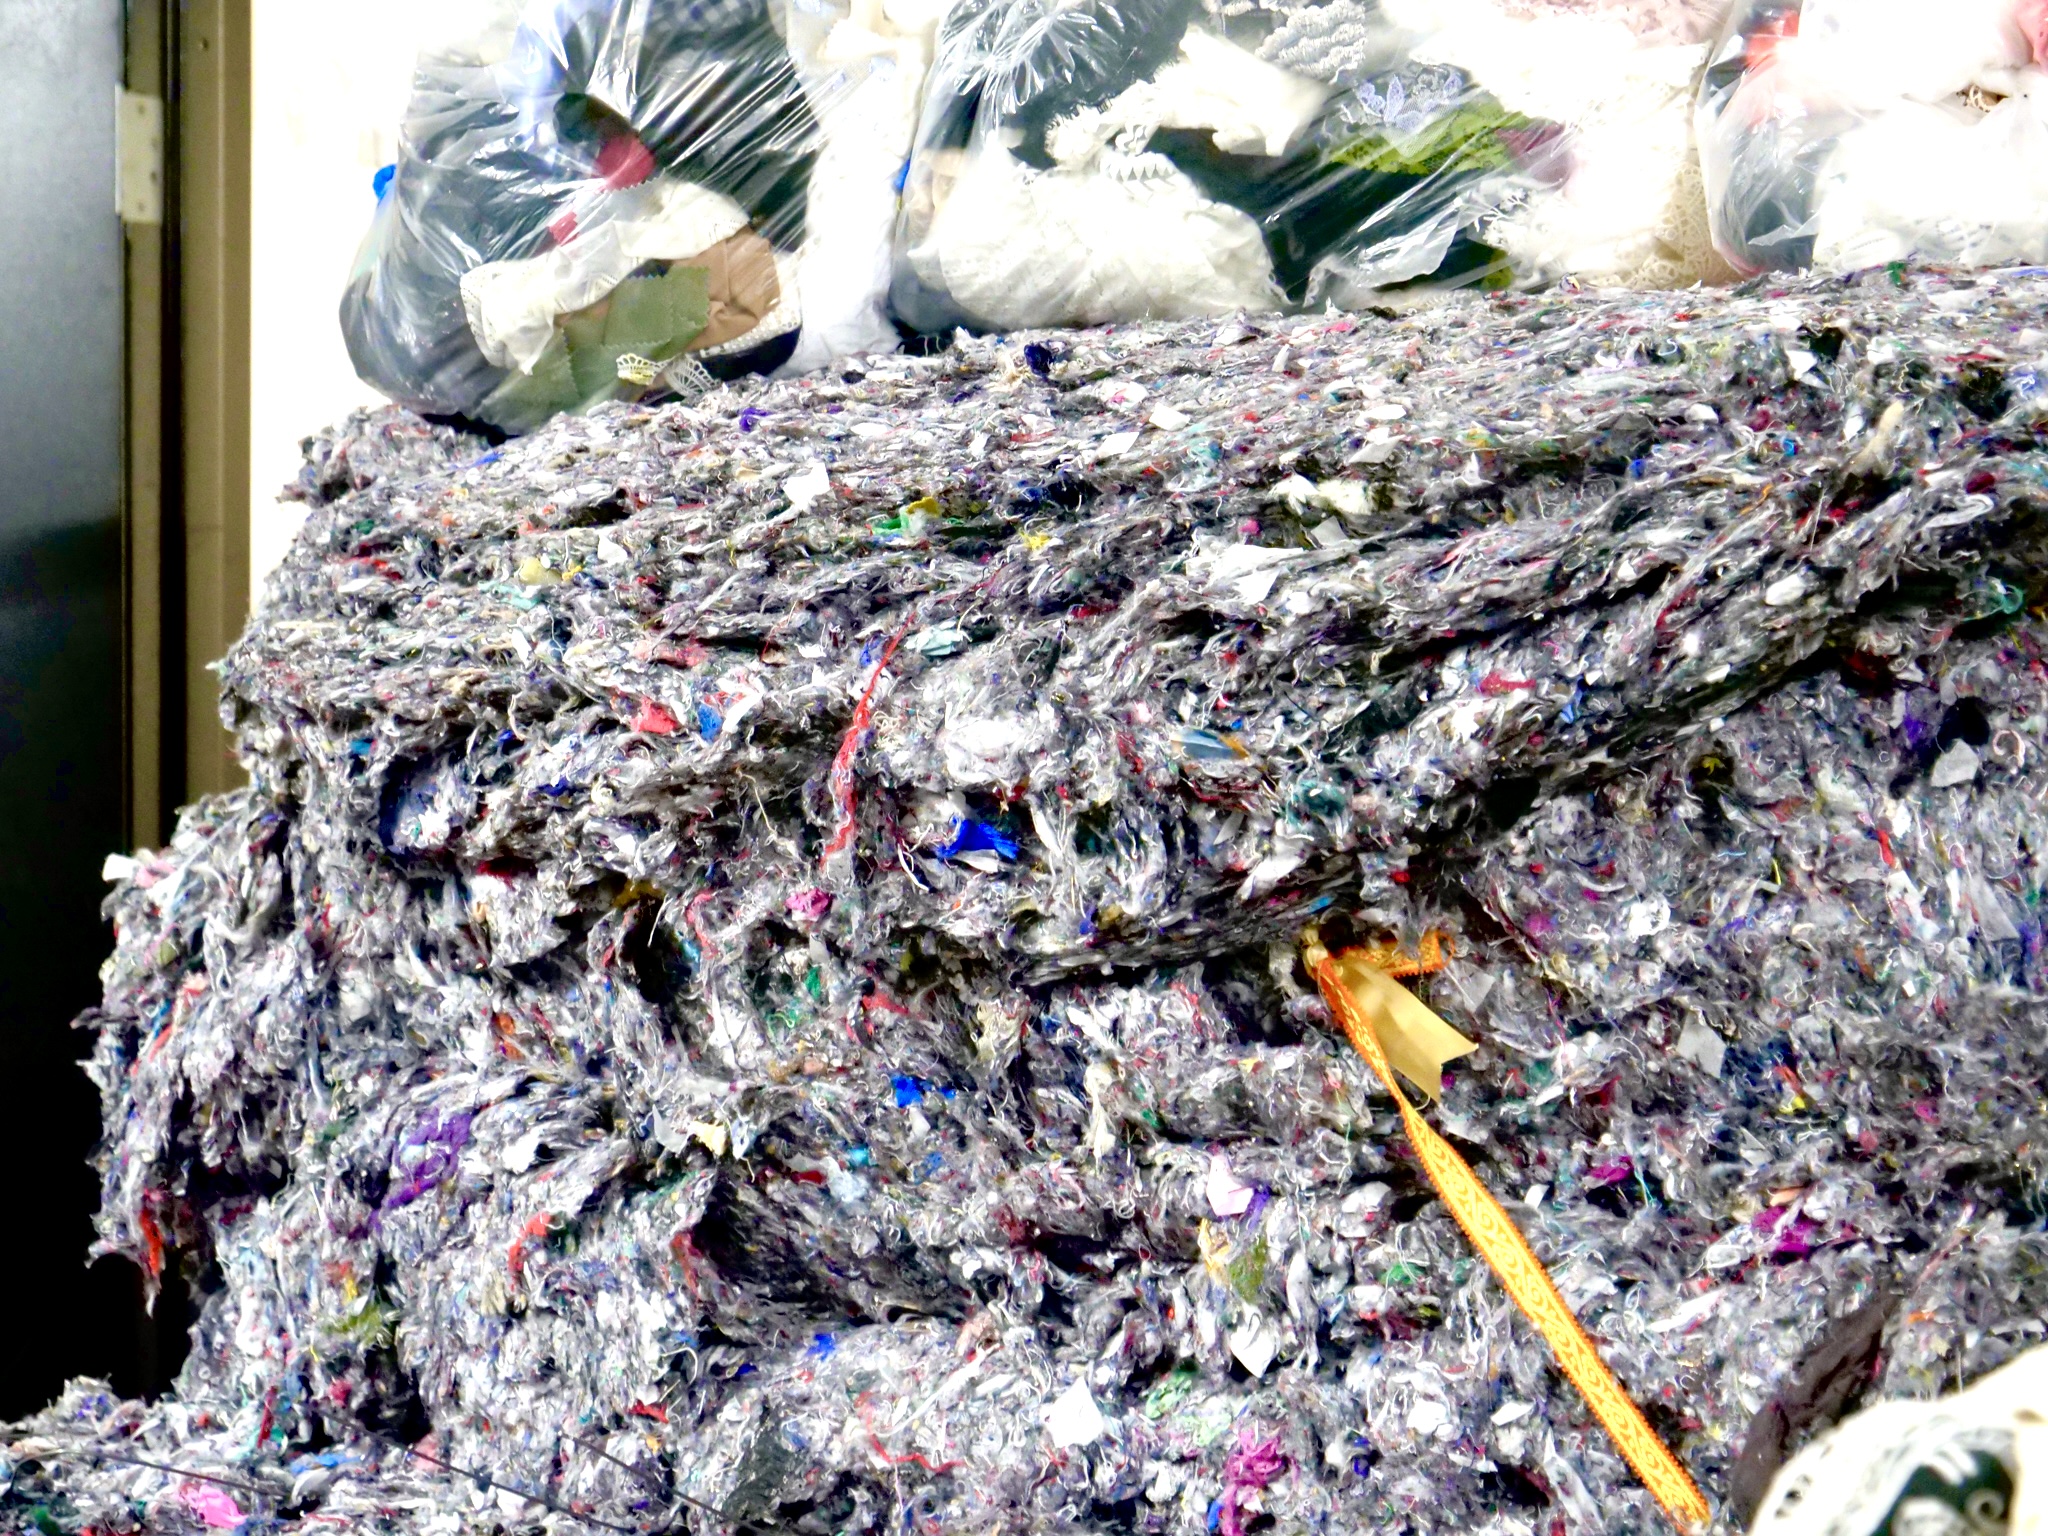 Excess fabric material and scraps can be recycled when it is shredded, also known as shoddy.